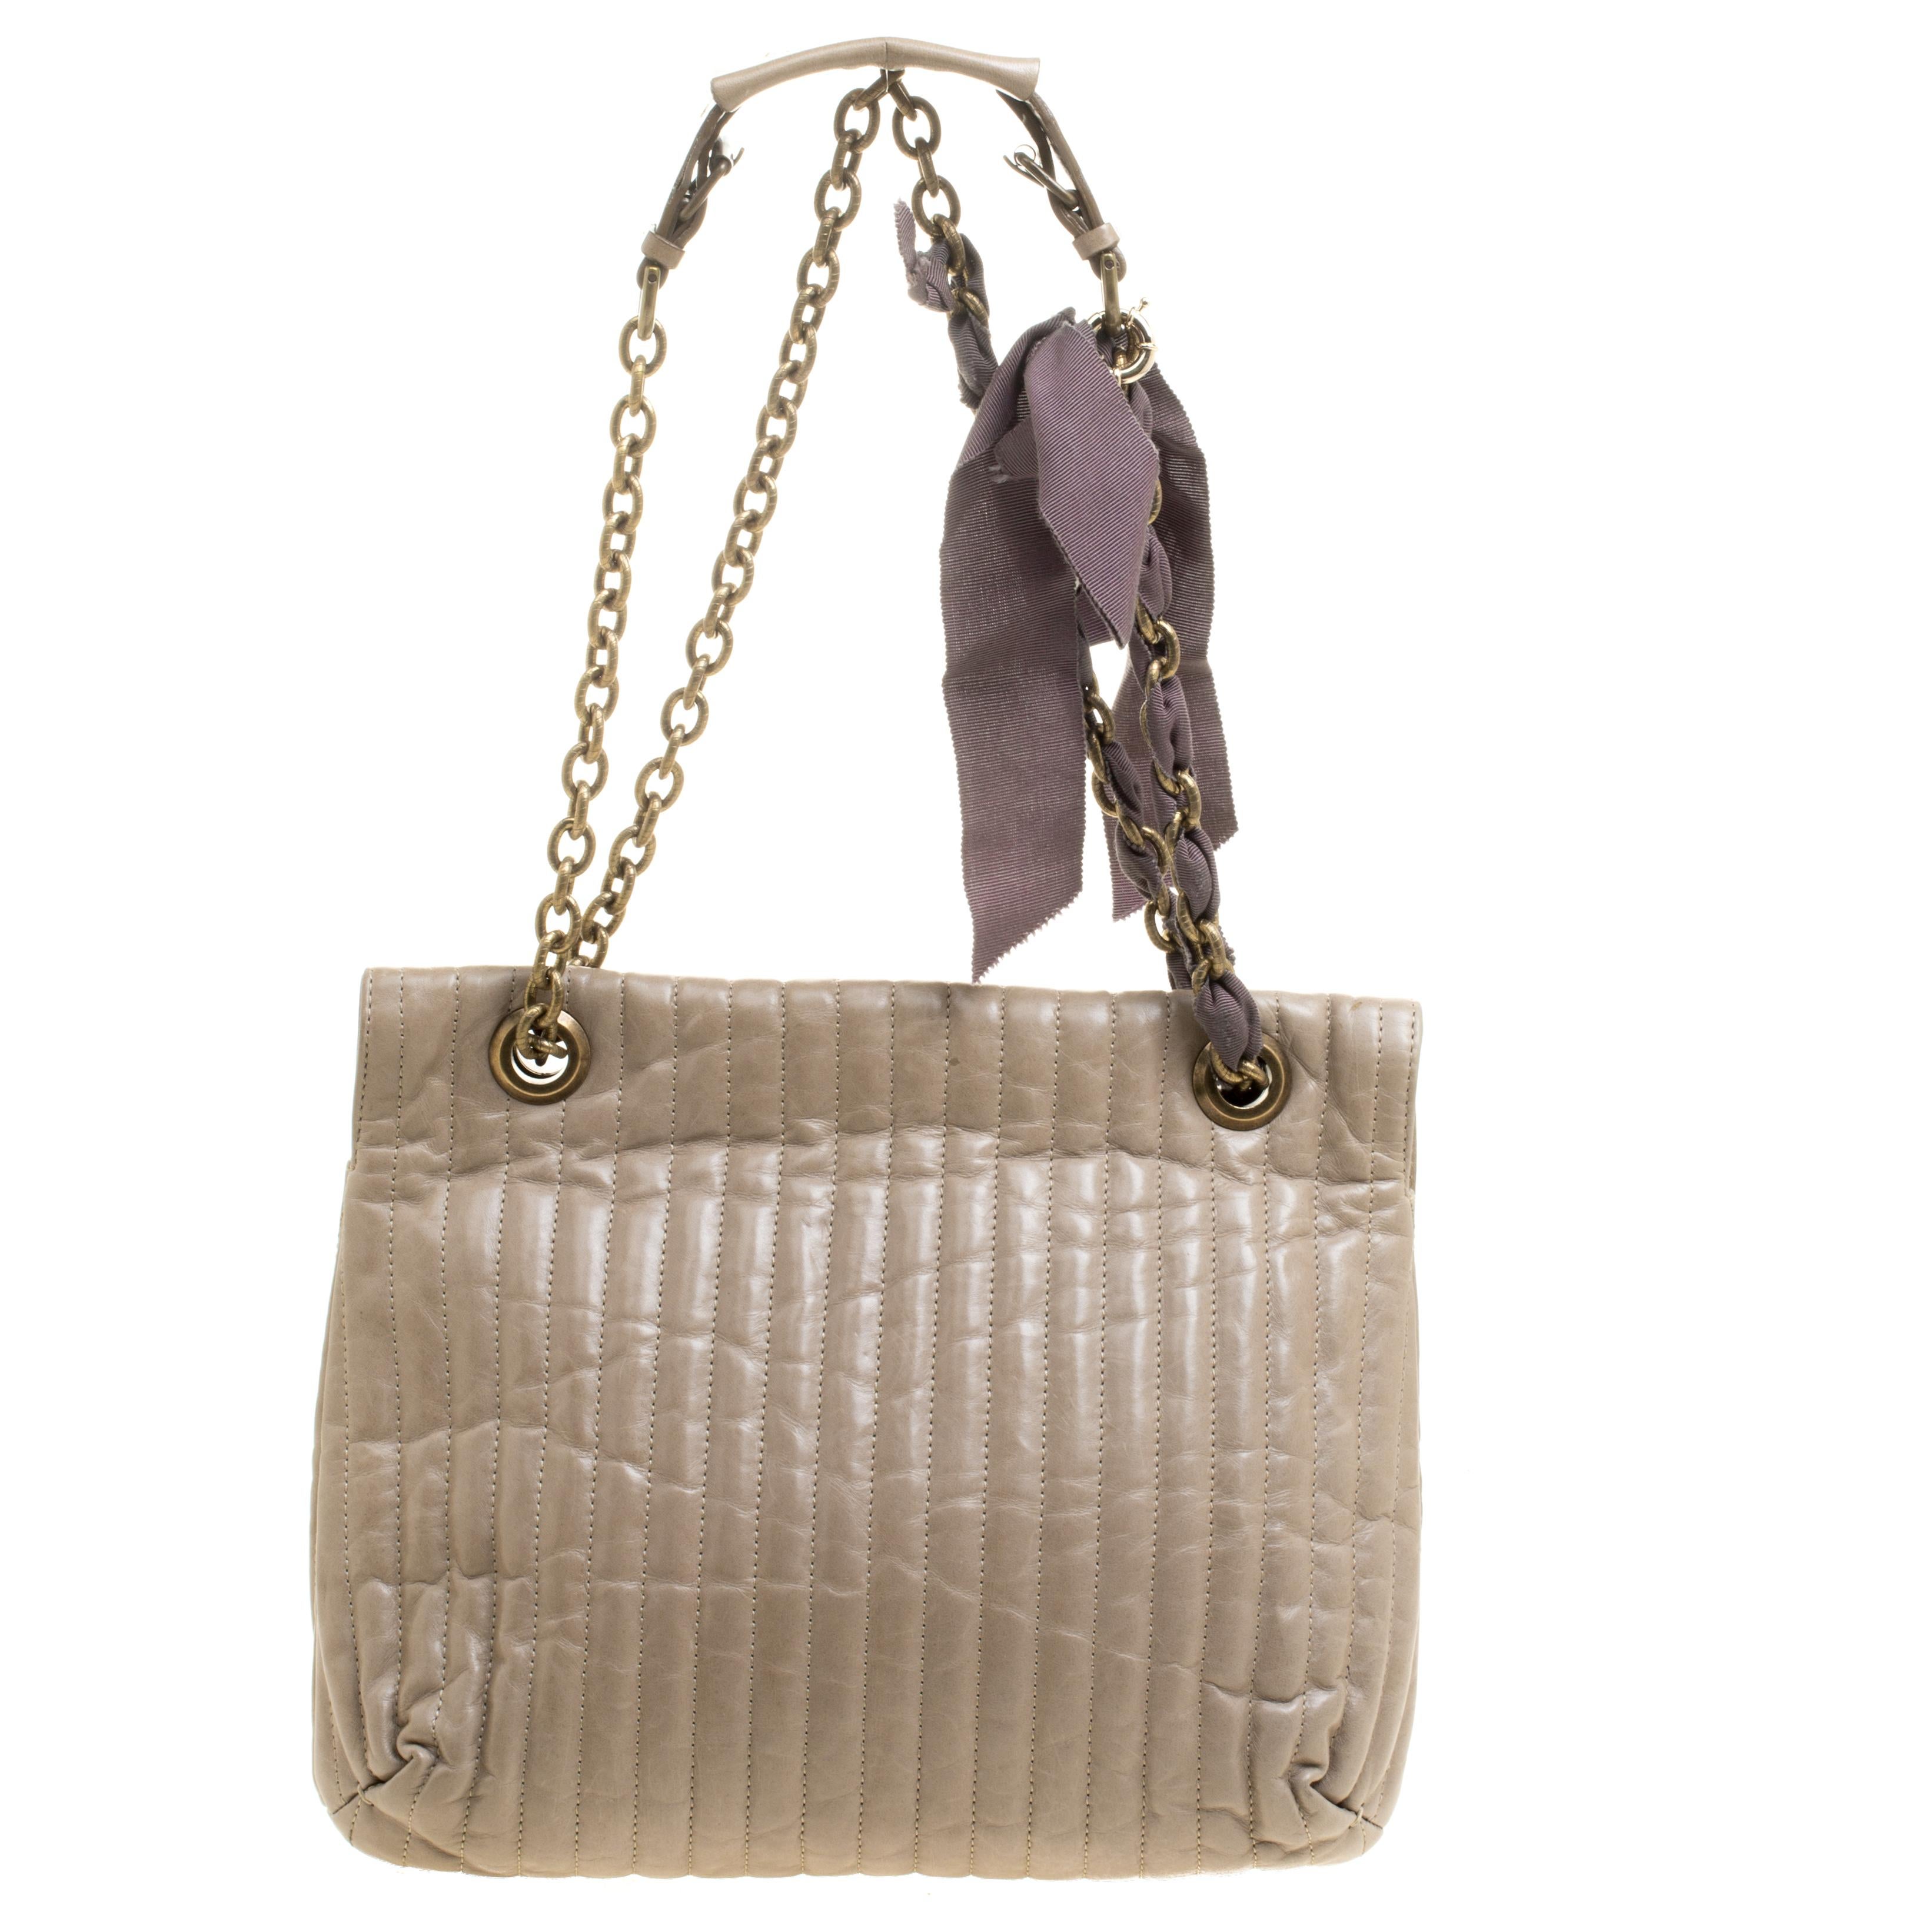 This stylish Happy shoulder bag from Lanvin is crafted from beige leather. The bag features a dual chain link strap with leather shoulder rest and a bow detail. The turn lock closure opens to a spacious fabric lined interior that houses a zip pocket